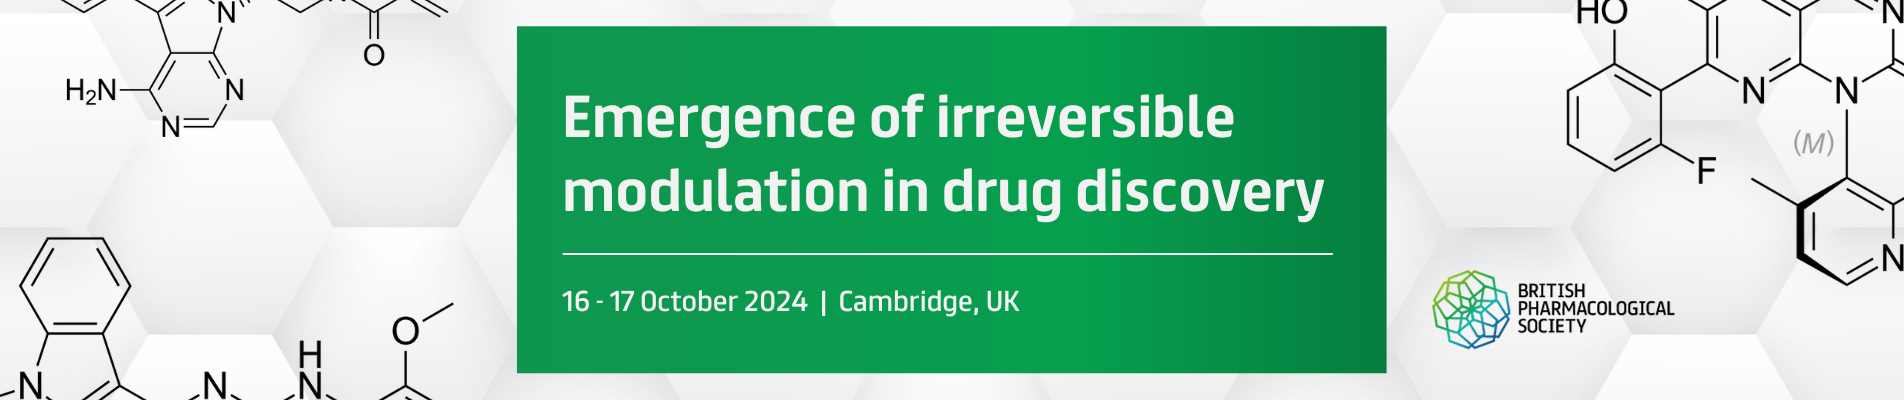 Emergence of irreversible modulation in drug discovery